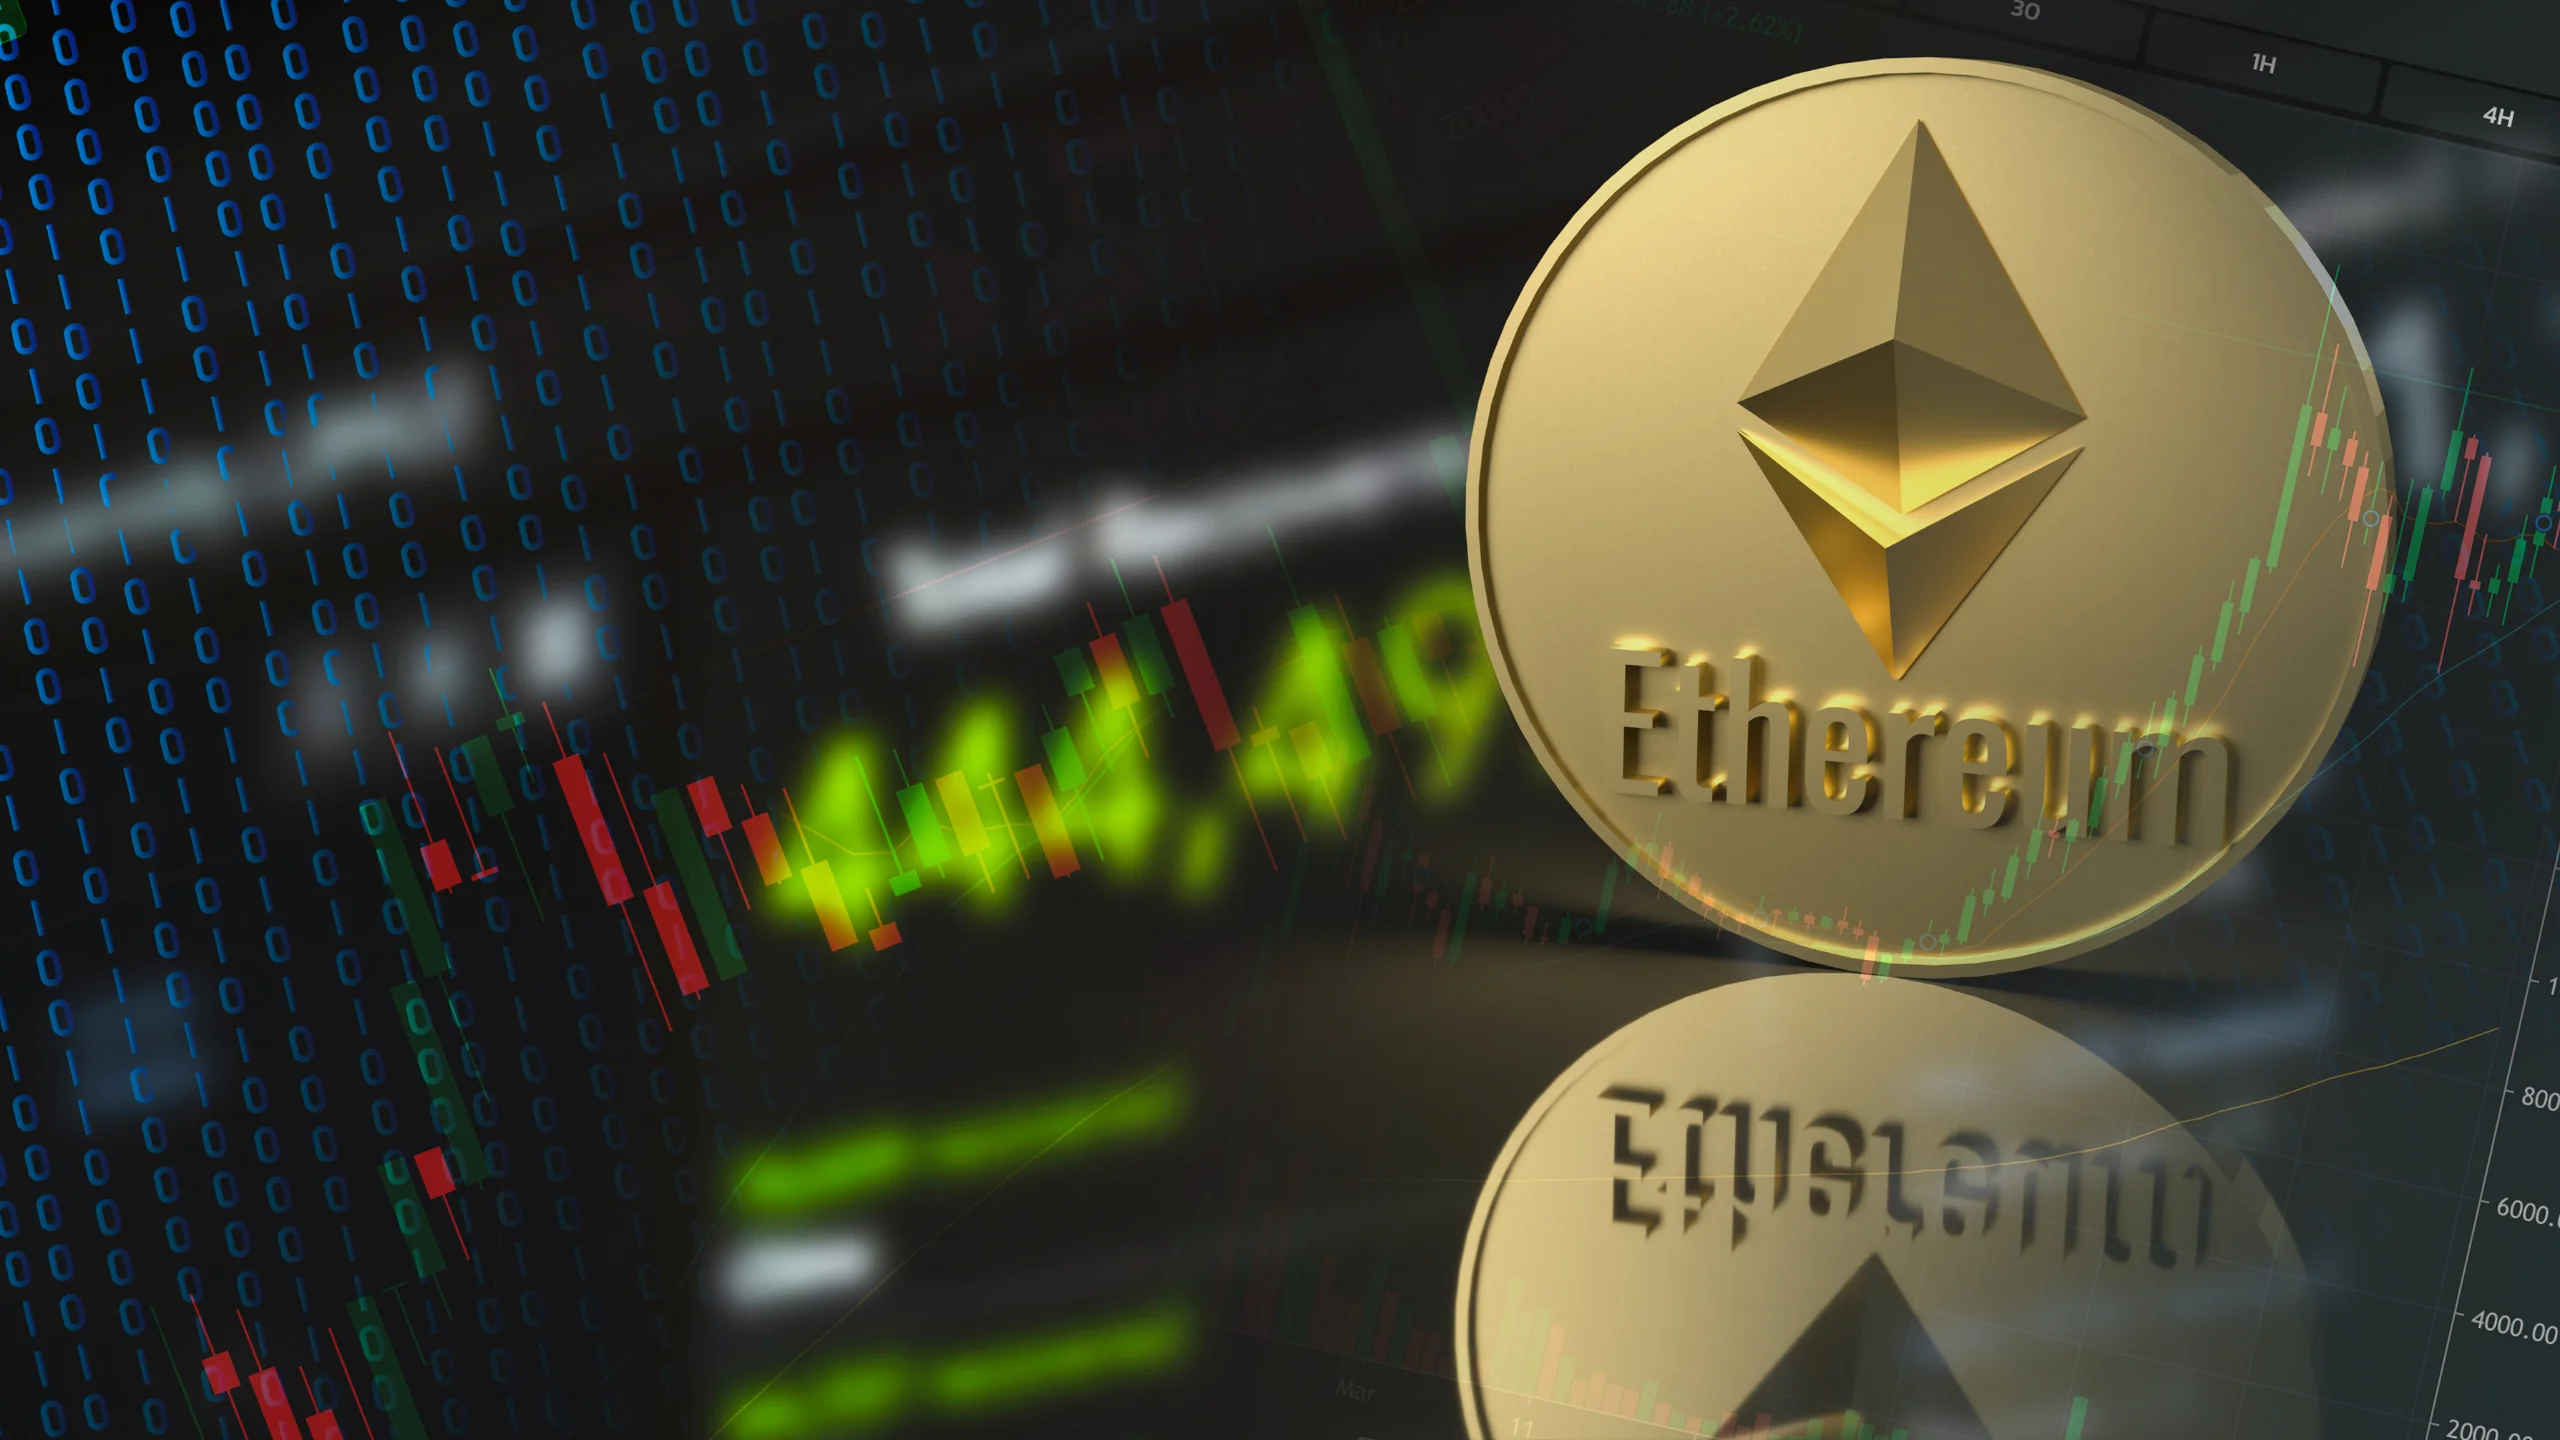 Ethereum logo representing the decentralized blockchain platform used for building and deploying smart contracts. Ethereum supports a variety of decentralized applications, enhancing security and reducing intermediaries.